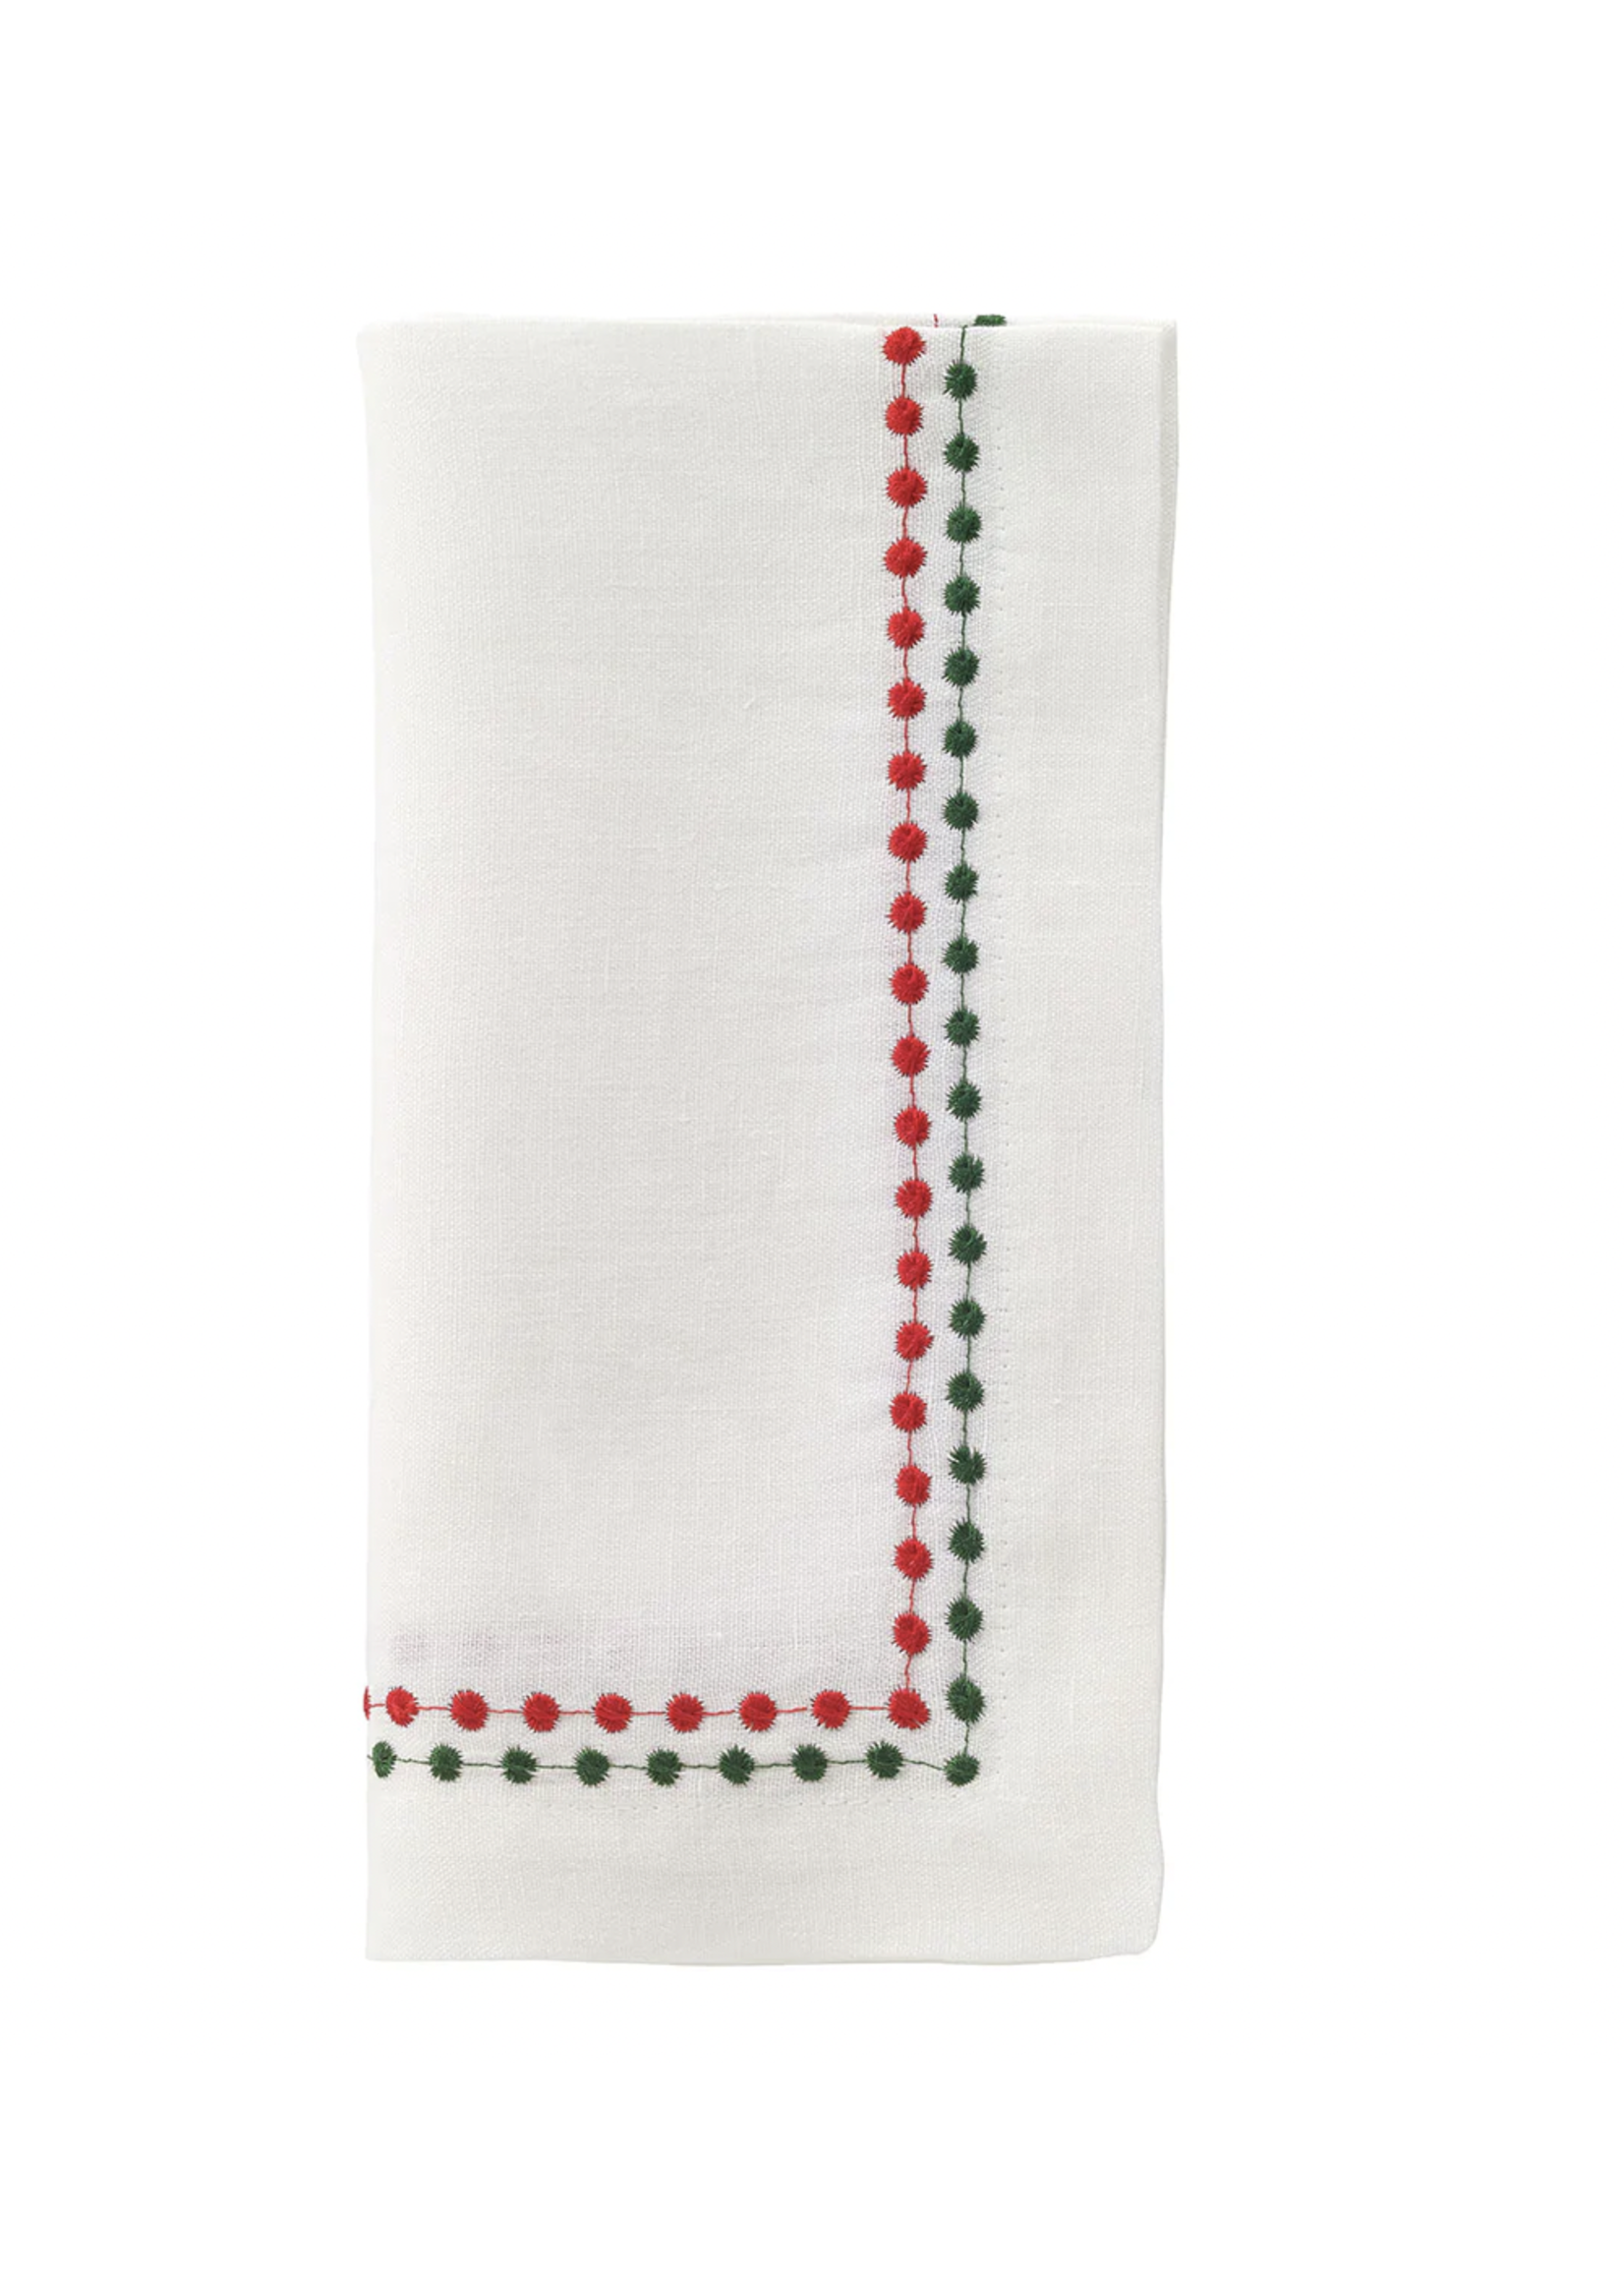 Bodrum Fine Linen Red and Green Emb Pearls 21in Napkin Set of 4